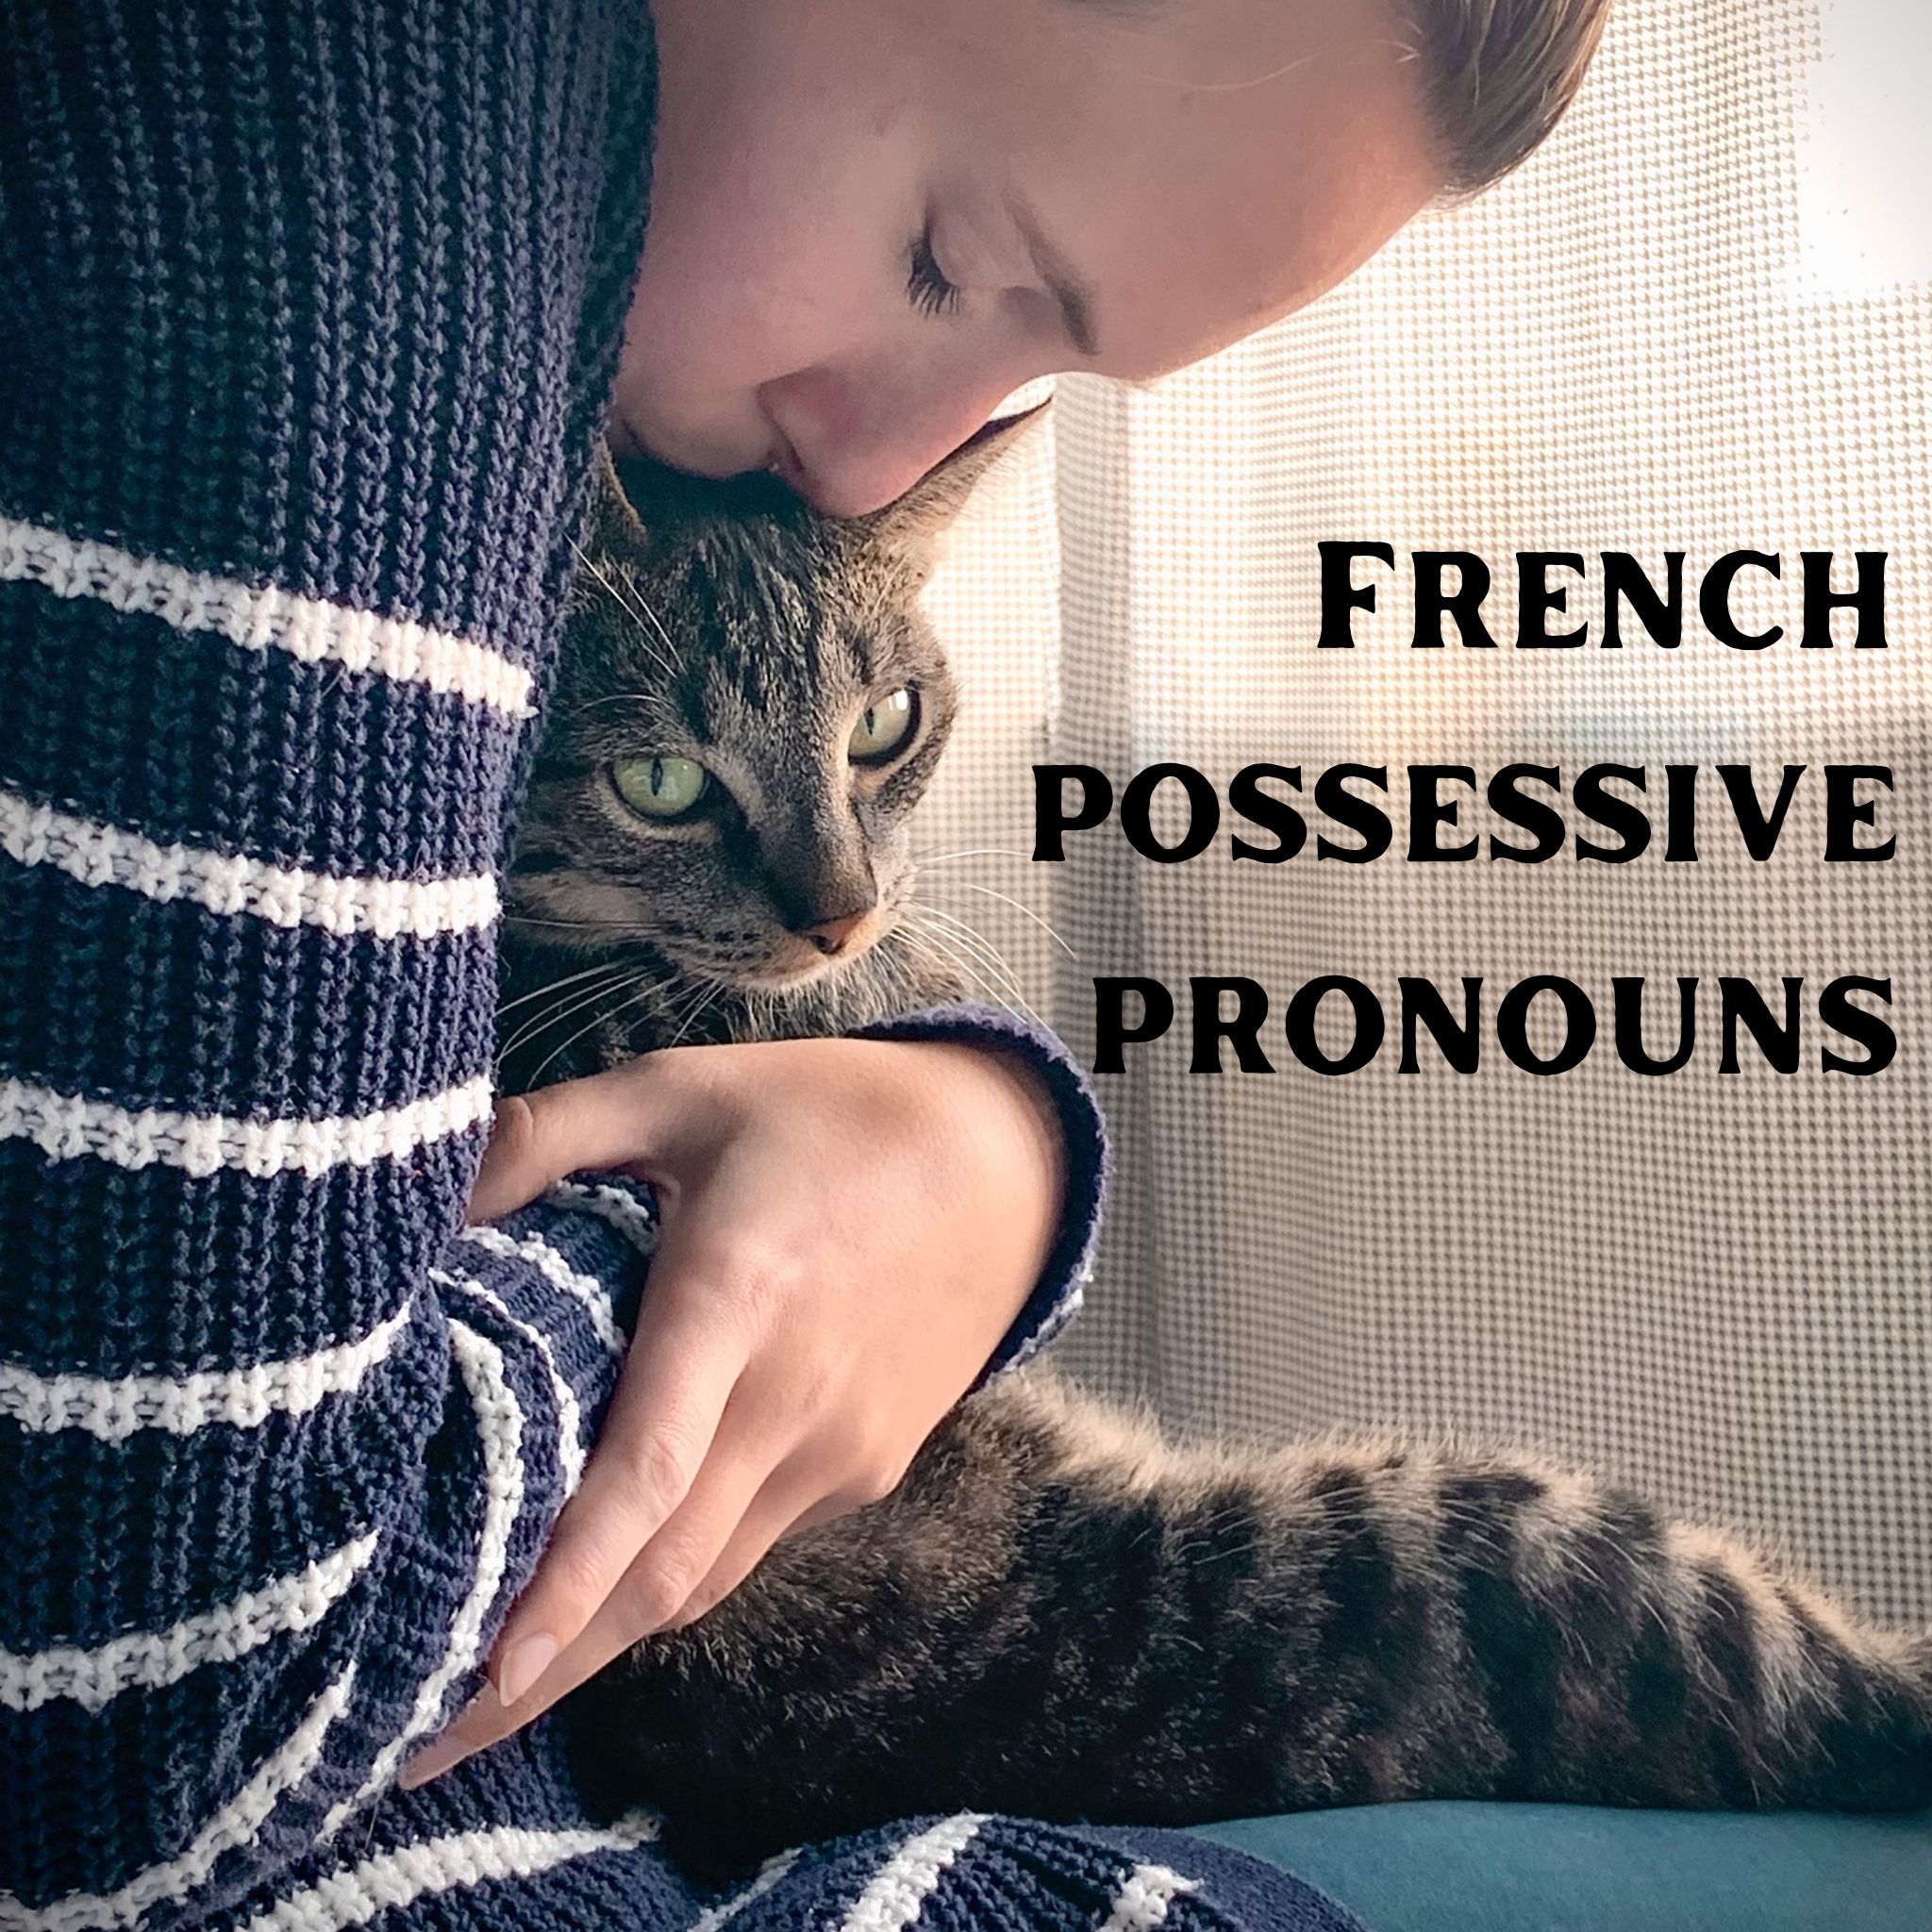 What Are The Possessive Pronouns In French